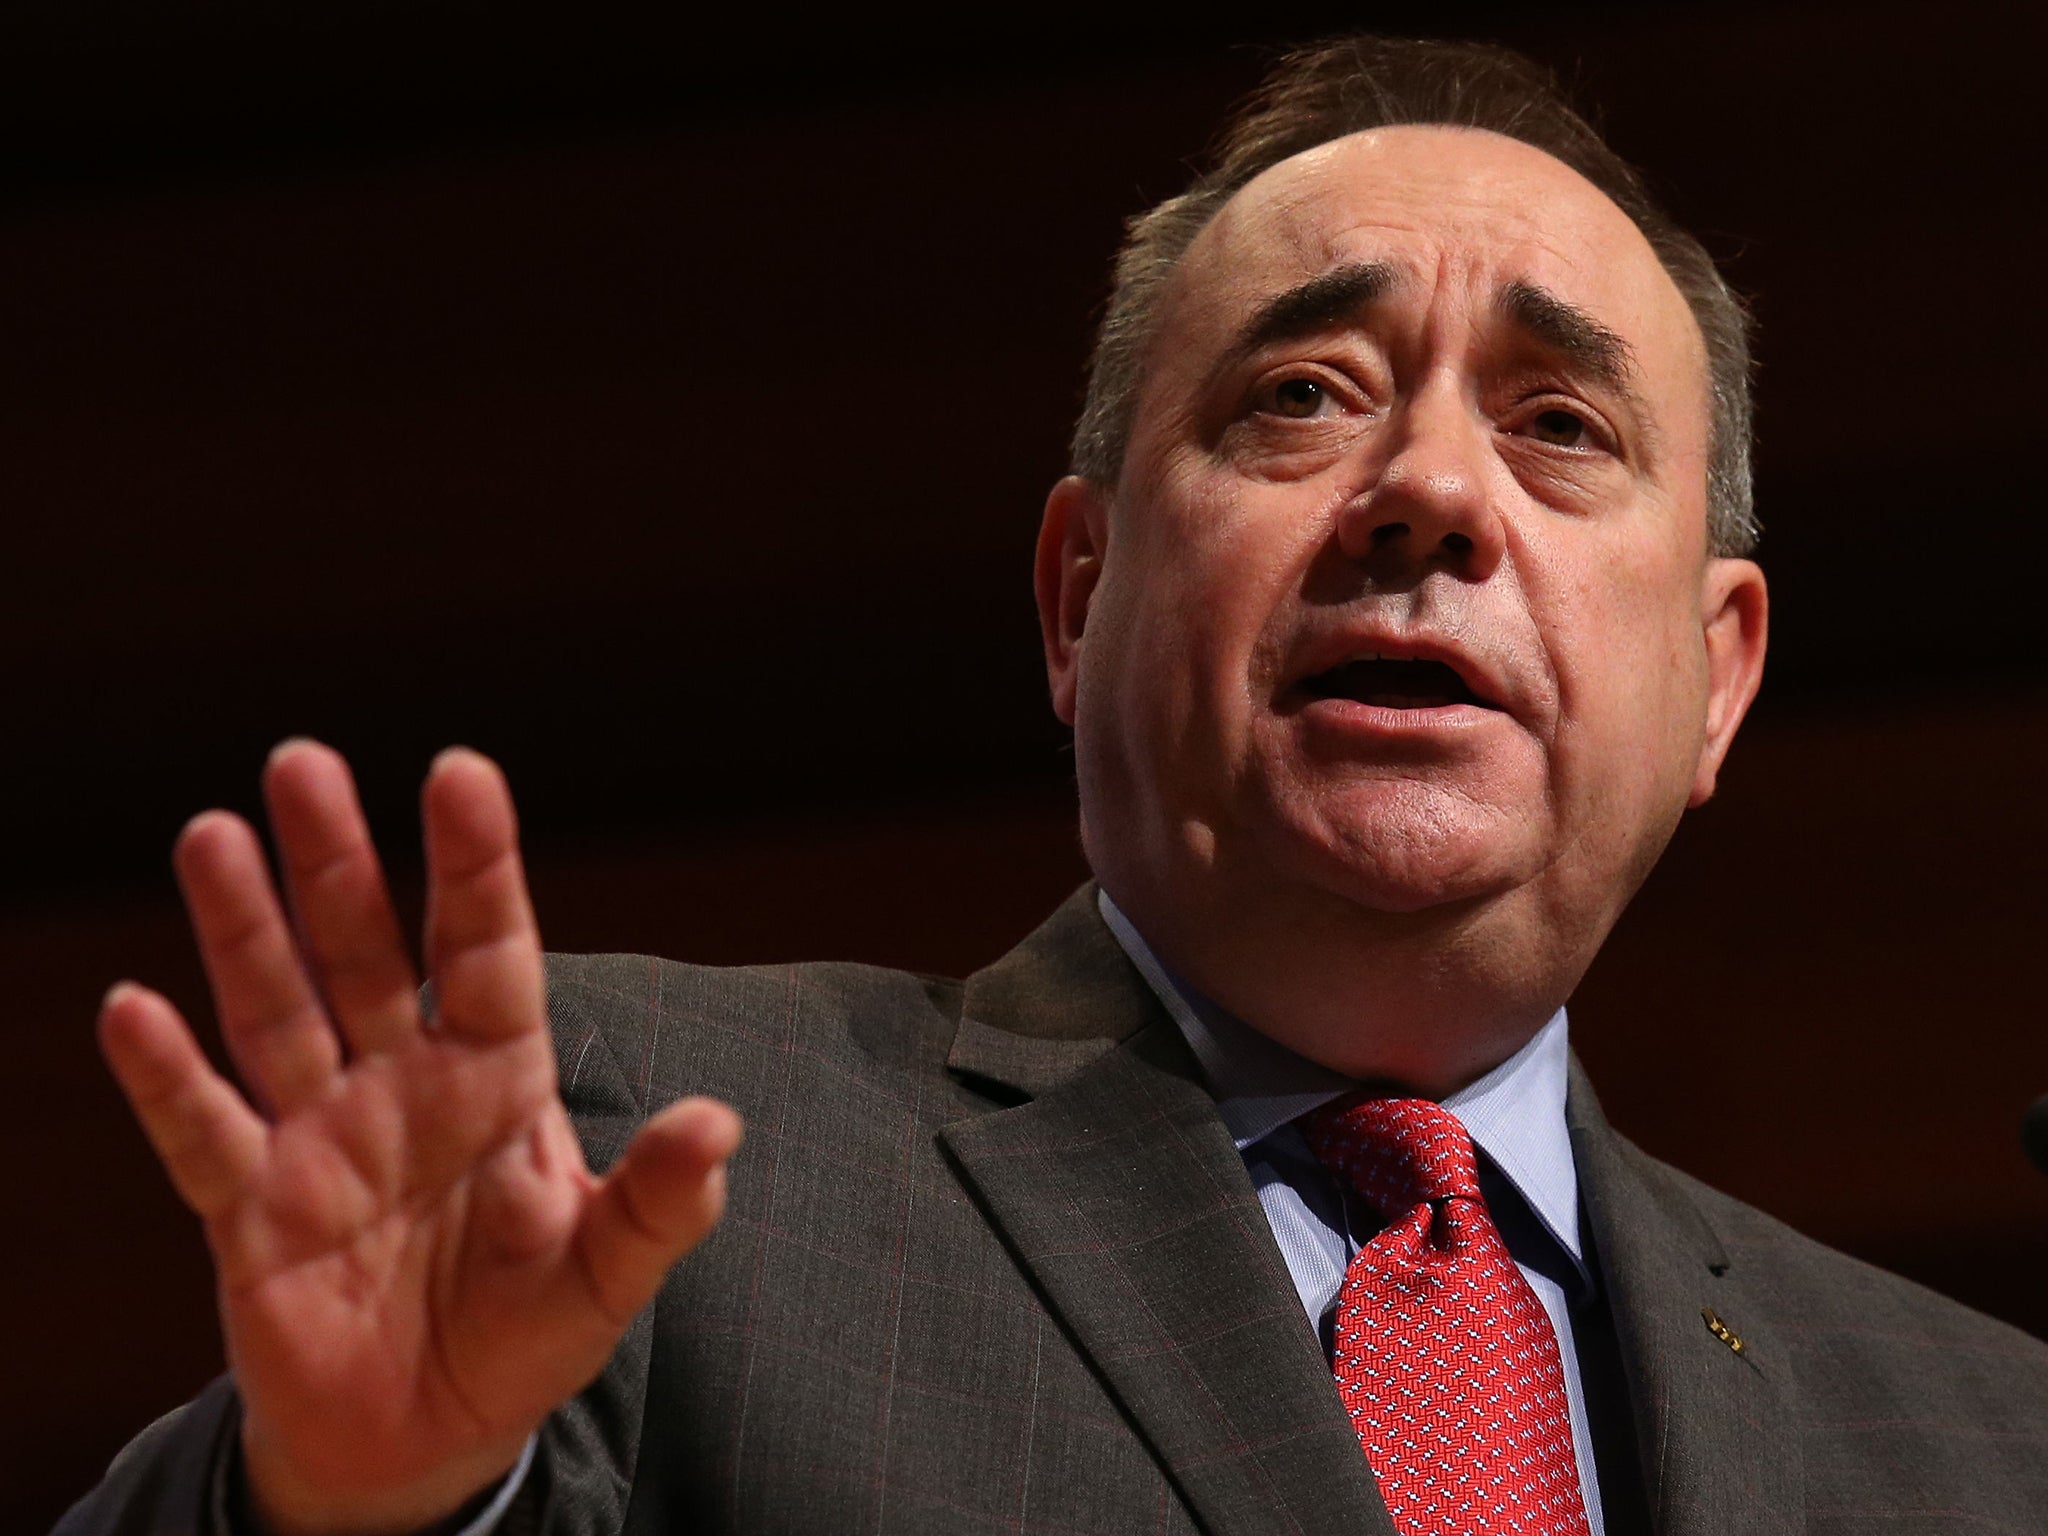 The threat of a Scottish UDI – unilateral declaration of independence – was repeatedly emphasised by Alex Salmond in his outgoing speech